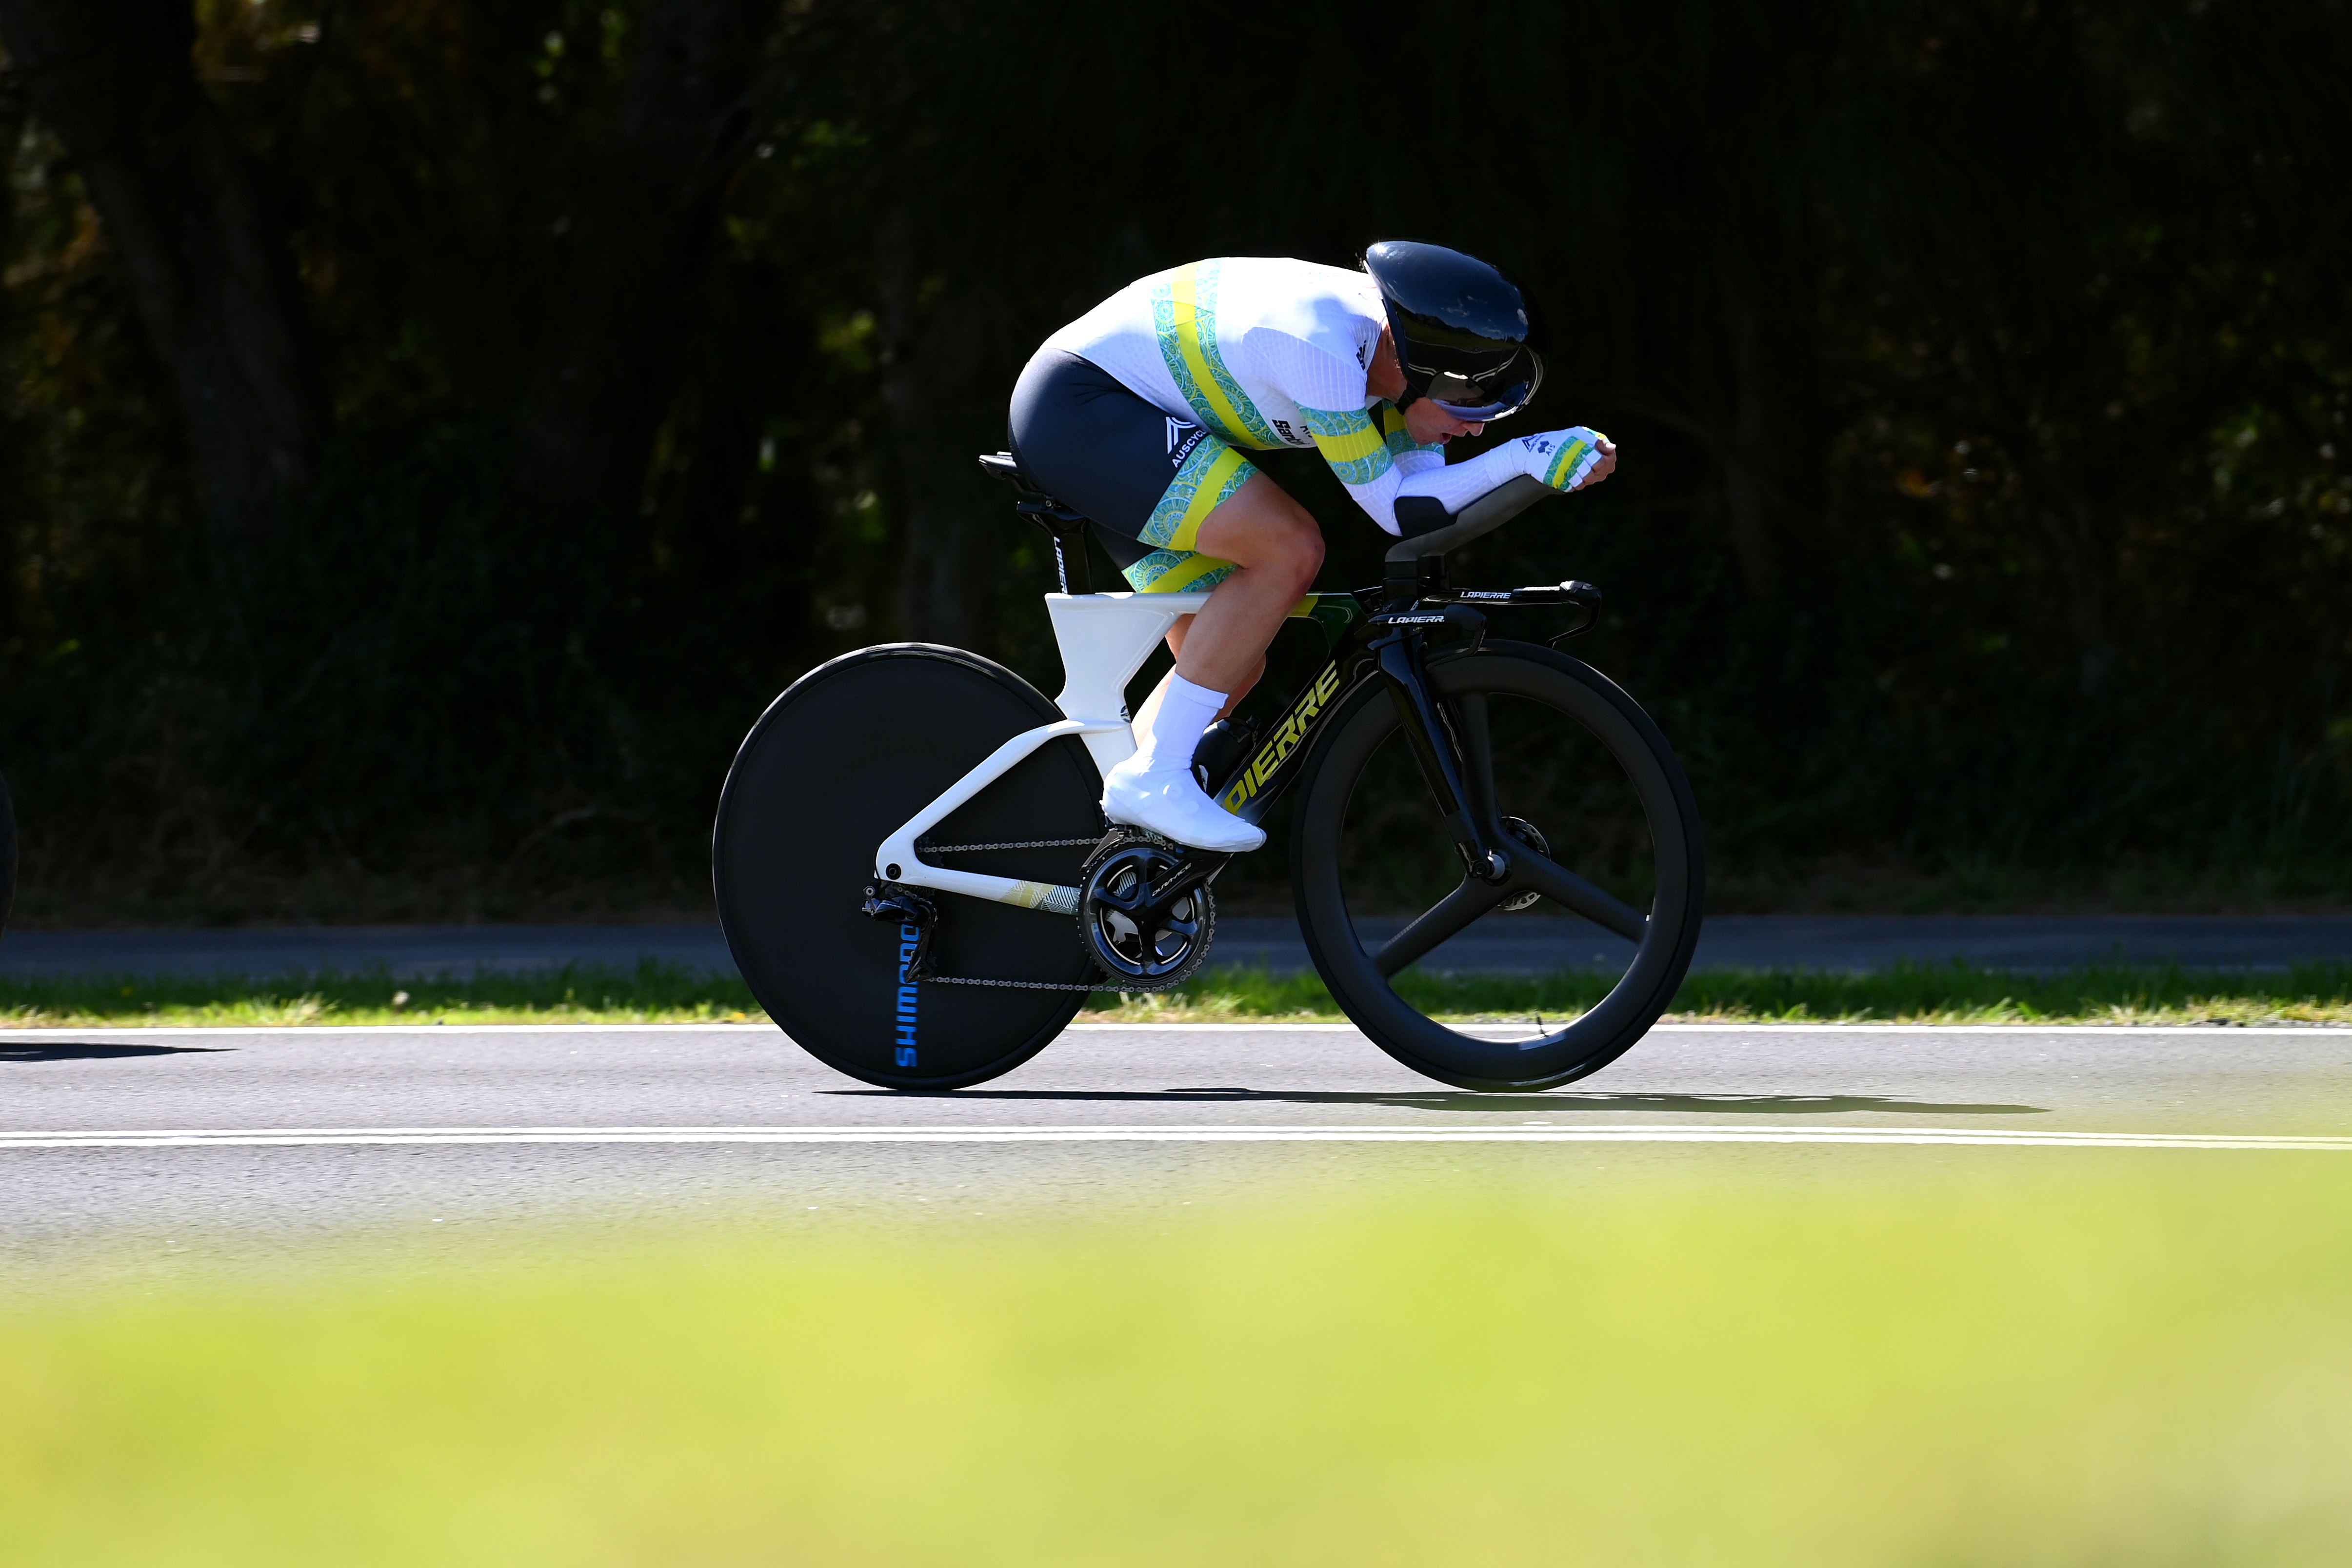 Grace Brown of Australia sprints during the UCI Road World Championships.